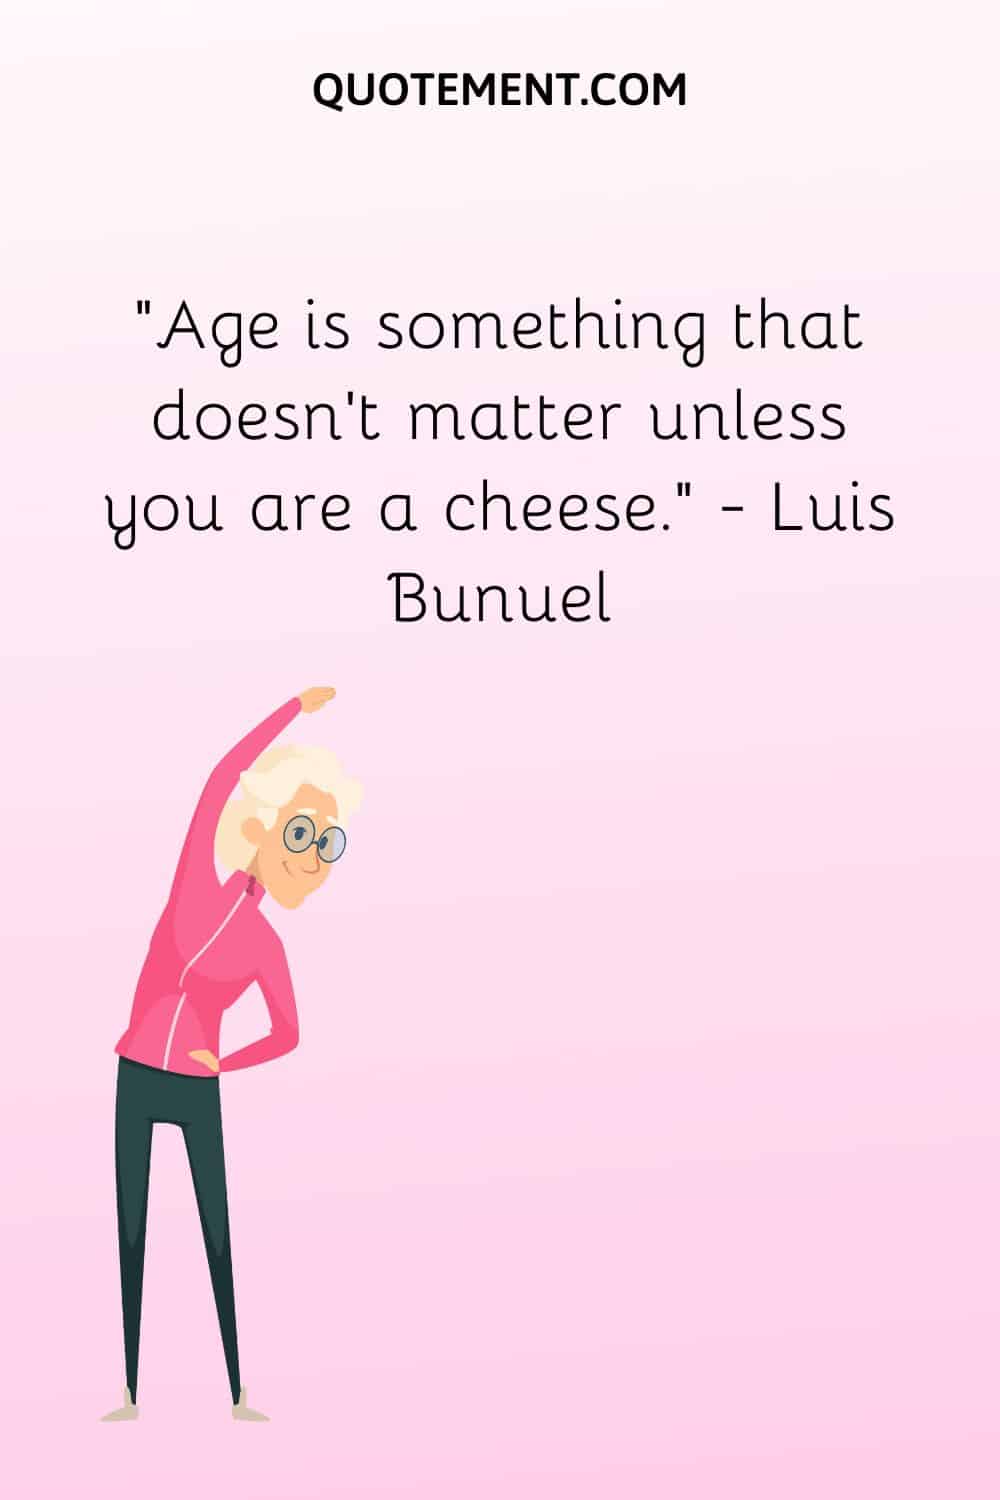 Age is something that doesn’t matter unless you are a cheese